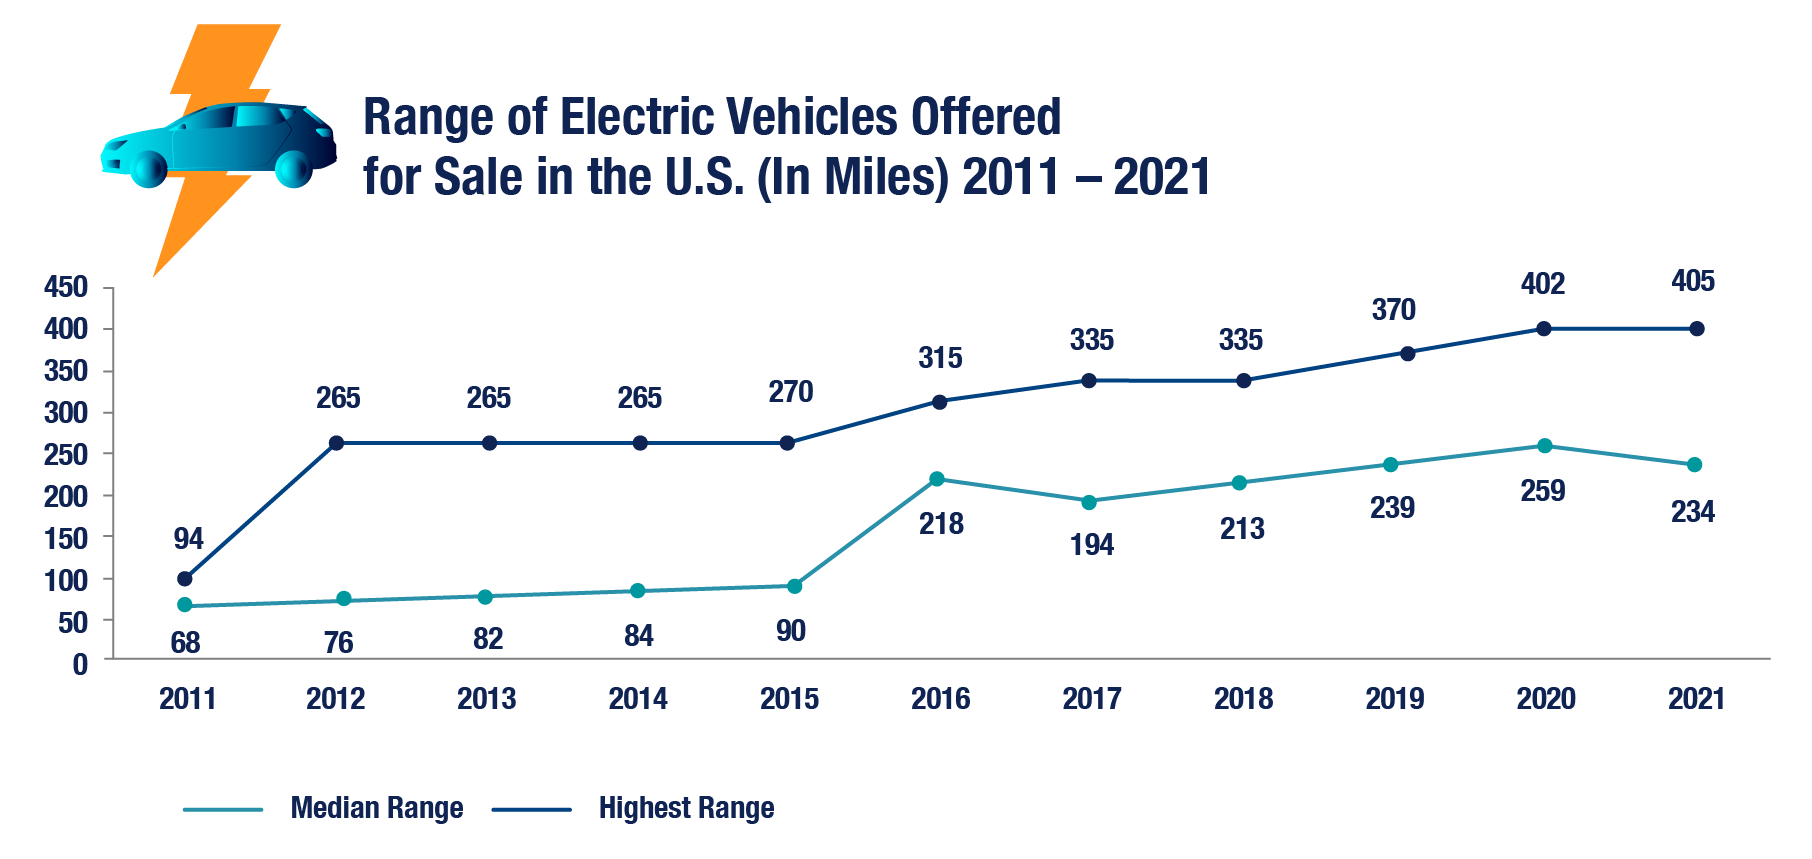 A line chart presenting the range of electric vehicles offered for sales in the U.S. (in miles) from 2011 to 2021. 